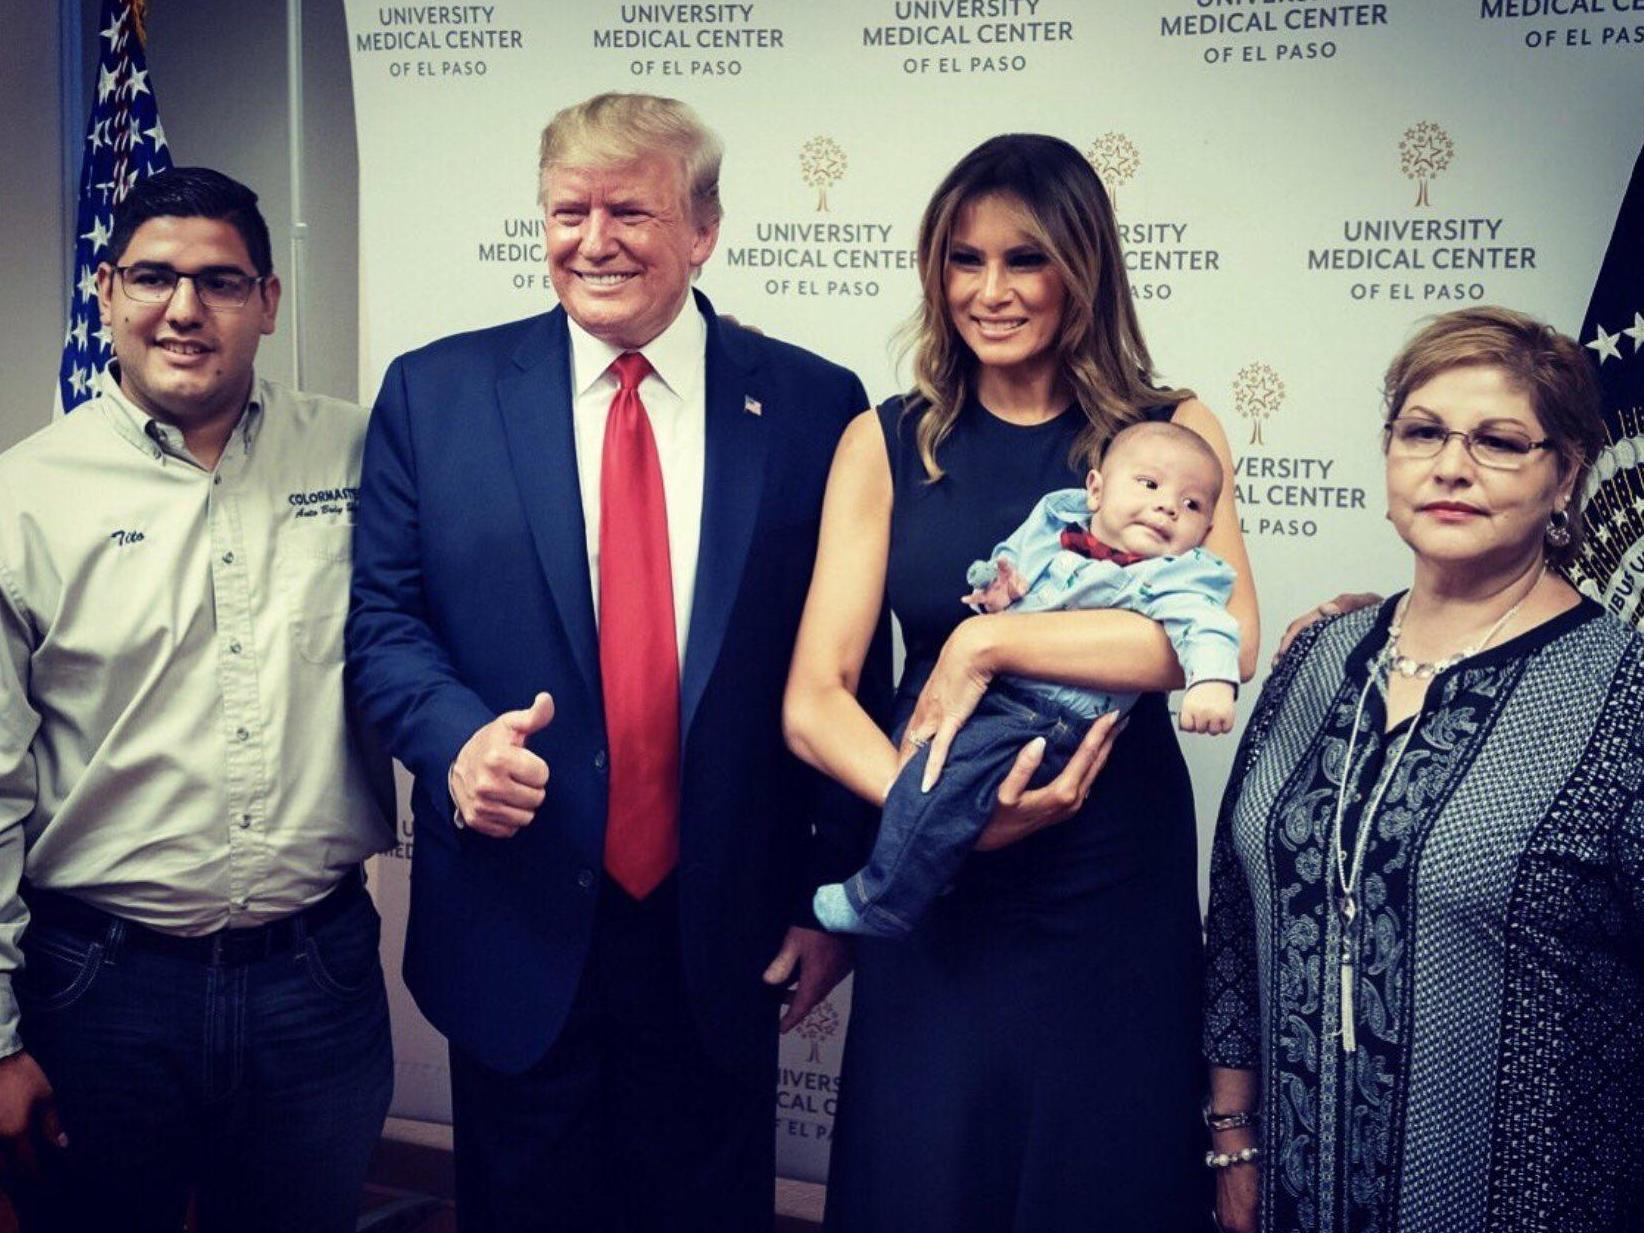 Donald and Melania Trump hold Paul, a baby made an orphan during El Paso supermarket shooting